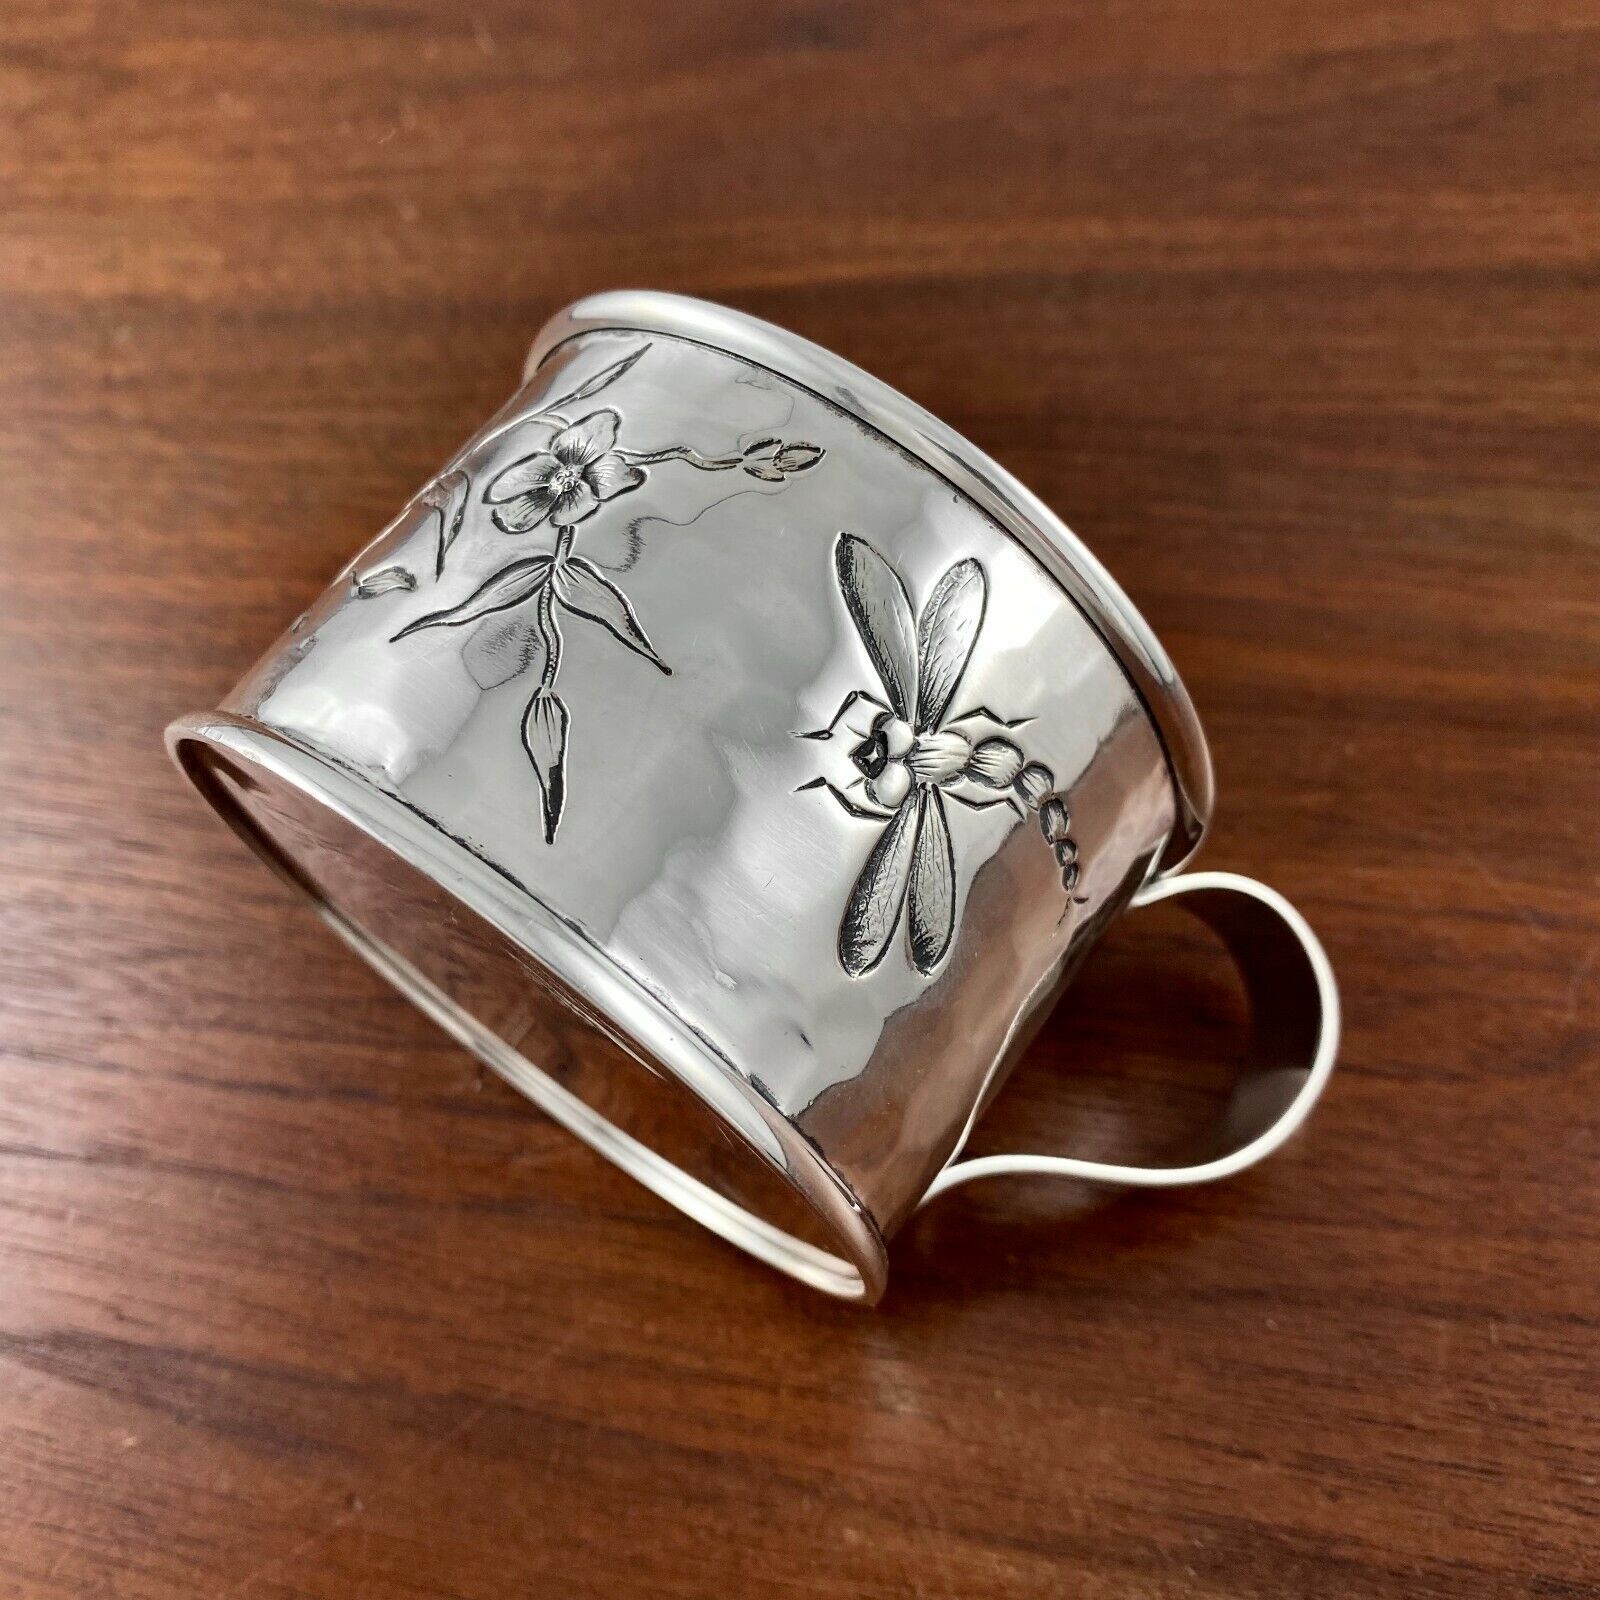 SHIEBLER AESTHETIC PERIOD STERLING SILVER HAND HAMMERED CUP POND DRAGONFLY